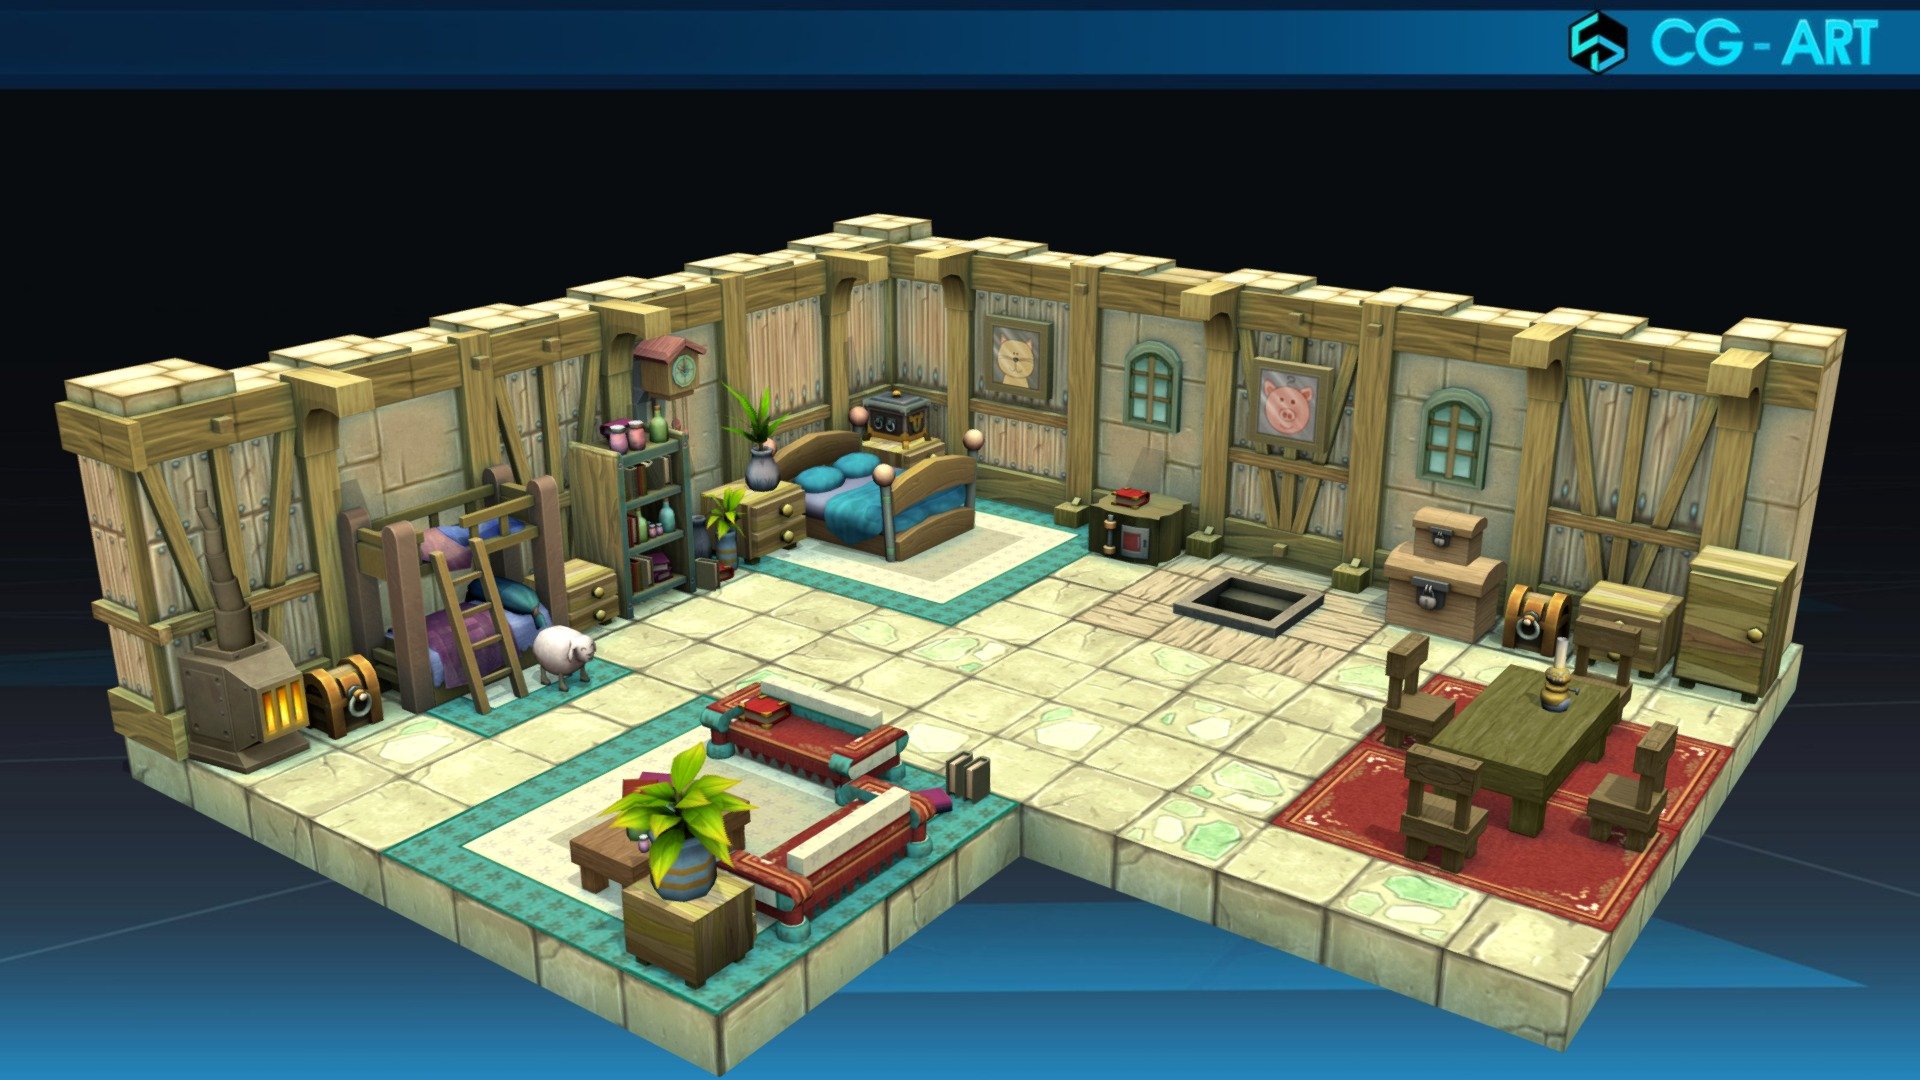 Inspired by the unique design of houses for players in the game Dofus, we continue to turn them into visual 3D models to show our love for this game

Source
* https://dofus.jeuxonline.info/actualite/35870/devblog-refontes-graphique-27

Tools Used
* Maya
* Photoshop - House of Amakna Castle_Dofus - 3D model by cgart.com (@goart) 3d model